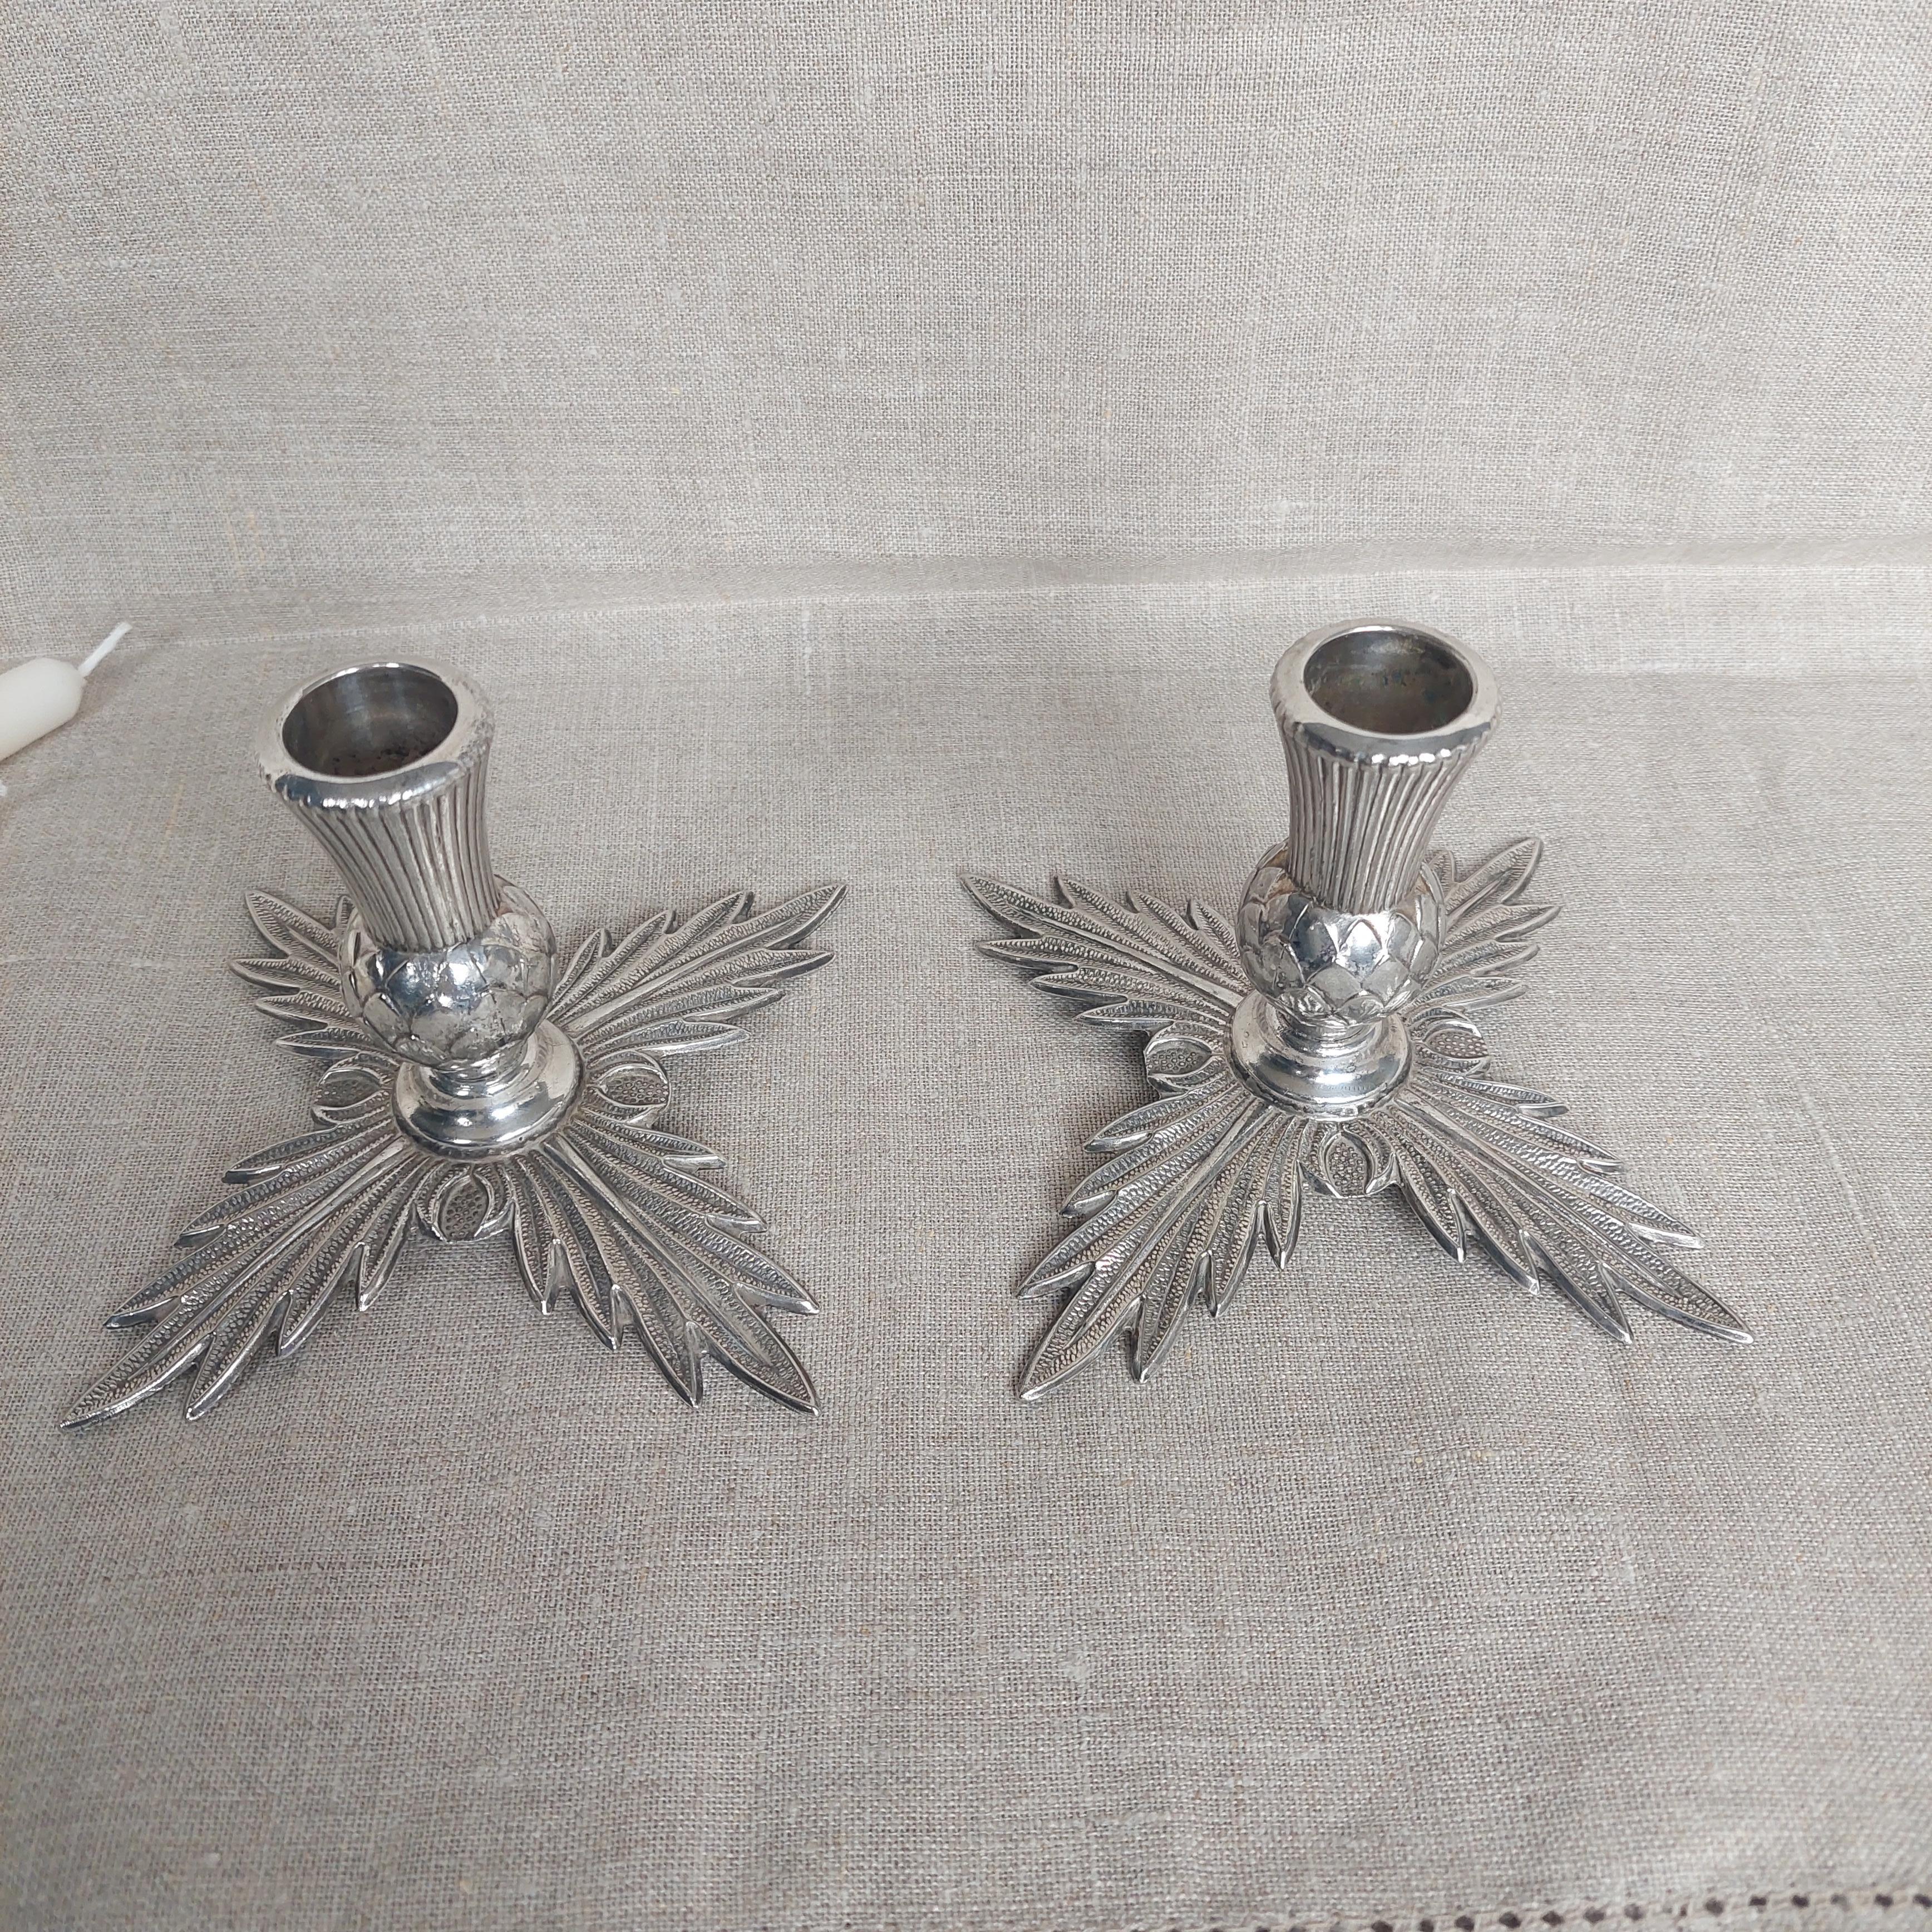 20th Century Midcentury Metal Thistle Candlesticks Holder Display Candle 1940-1950s Ianthe